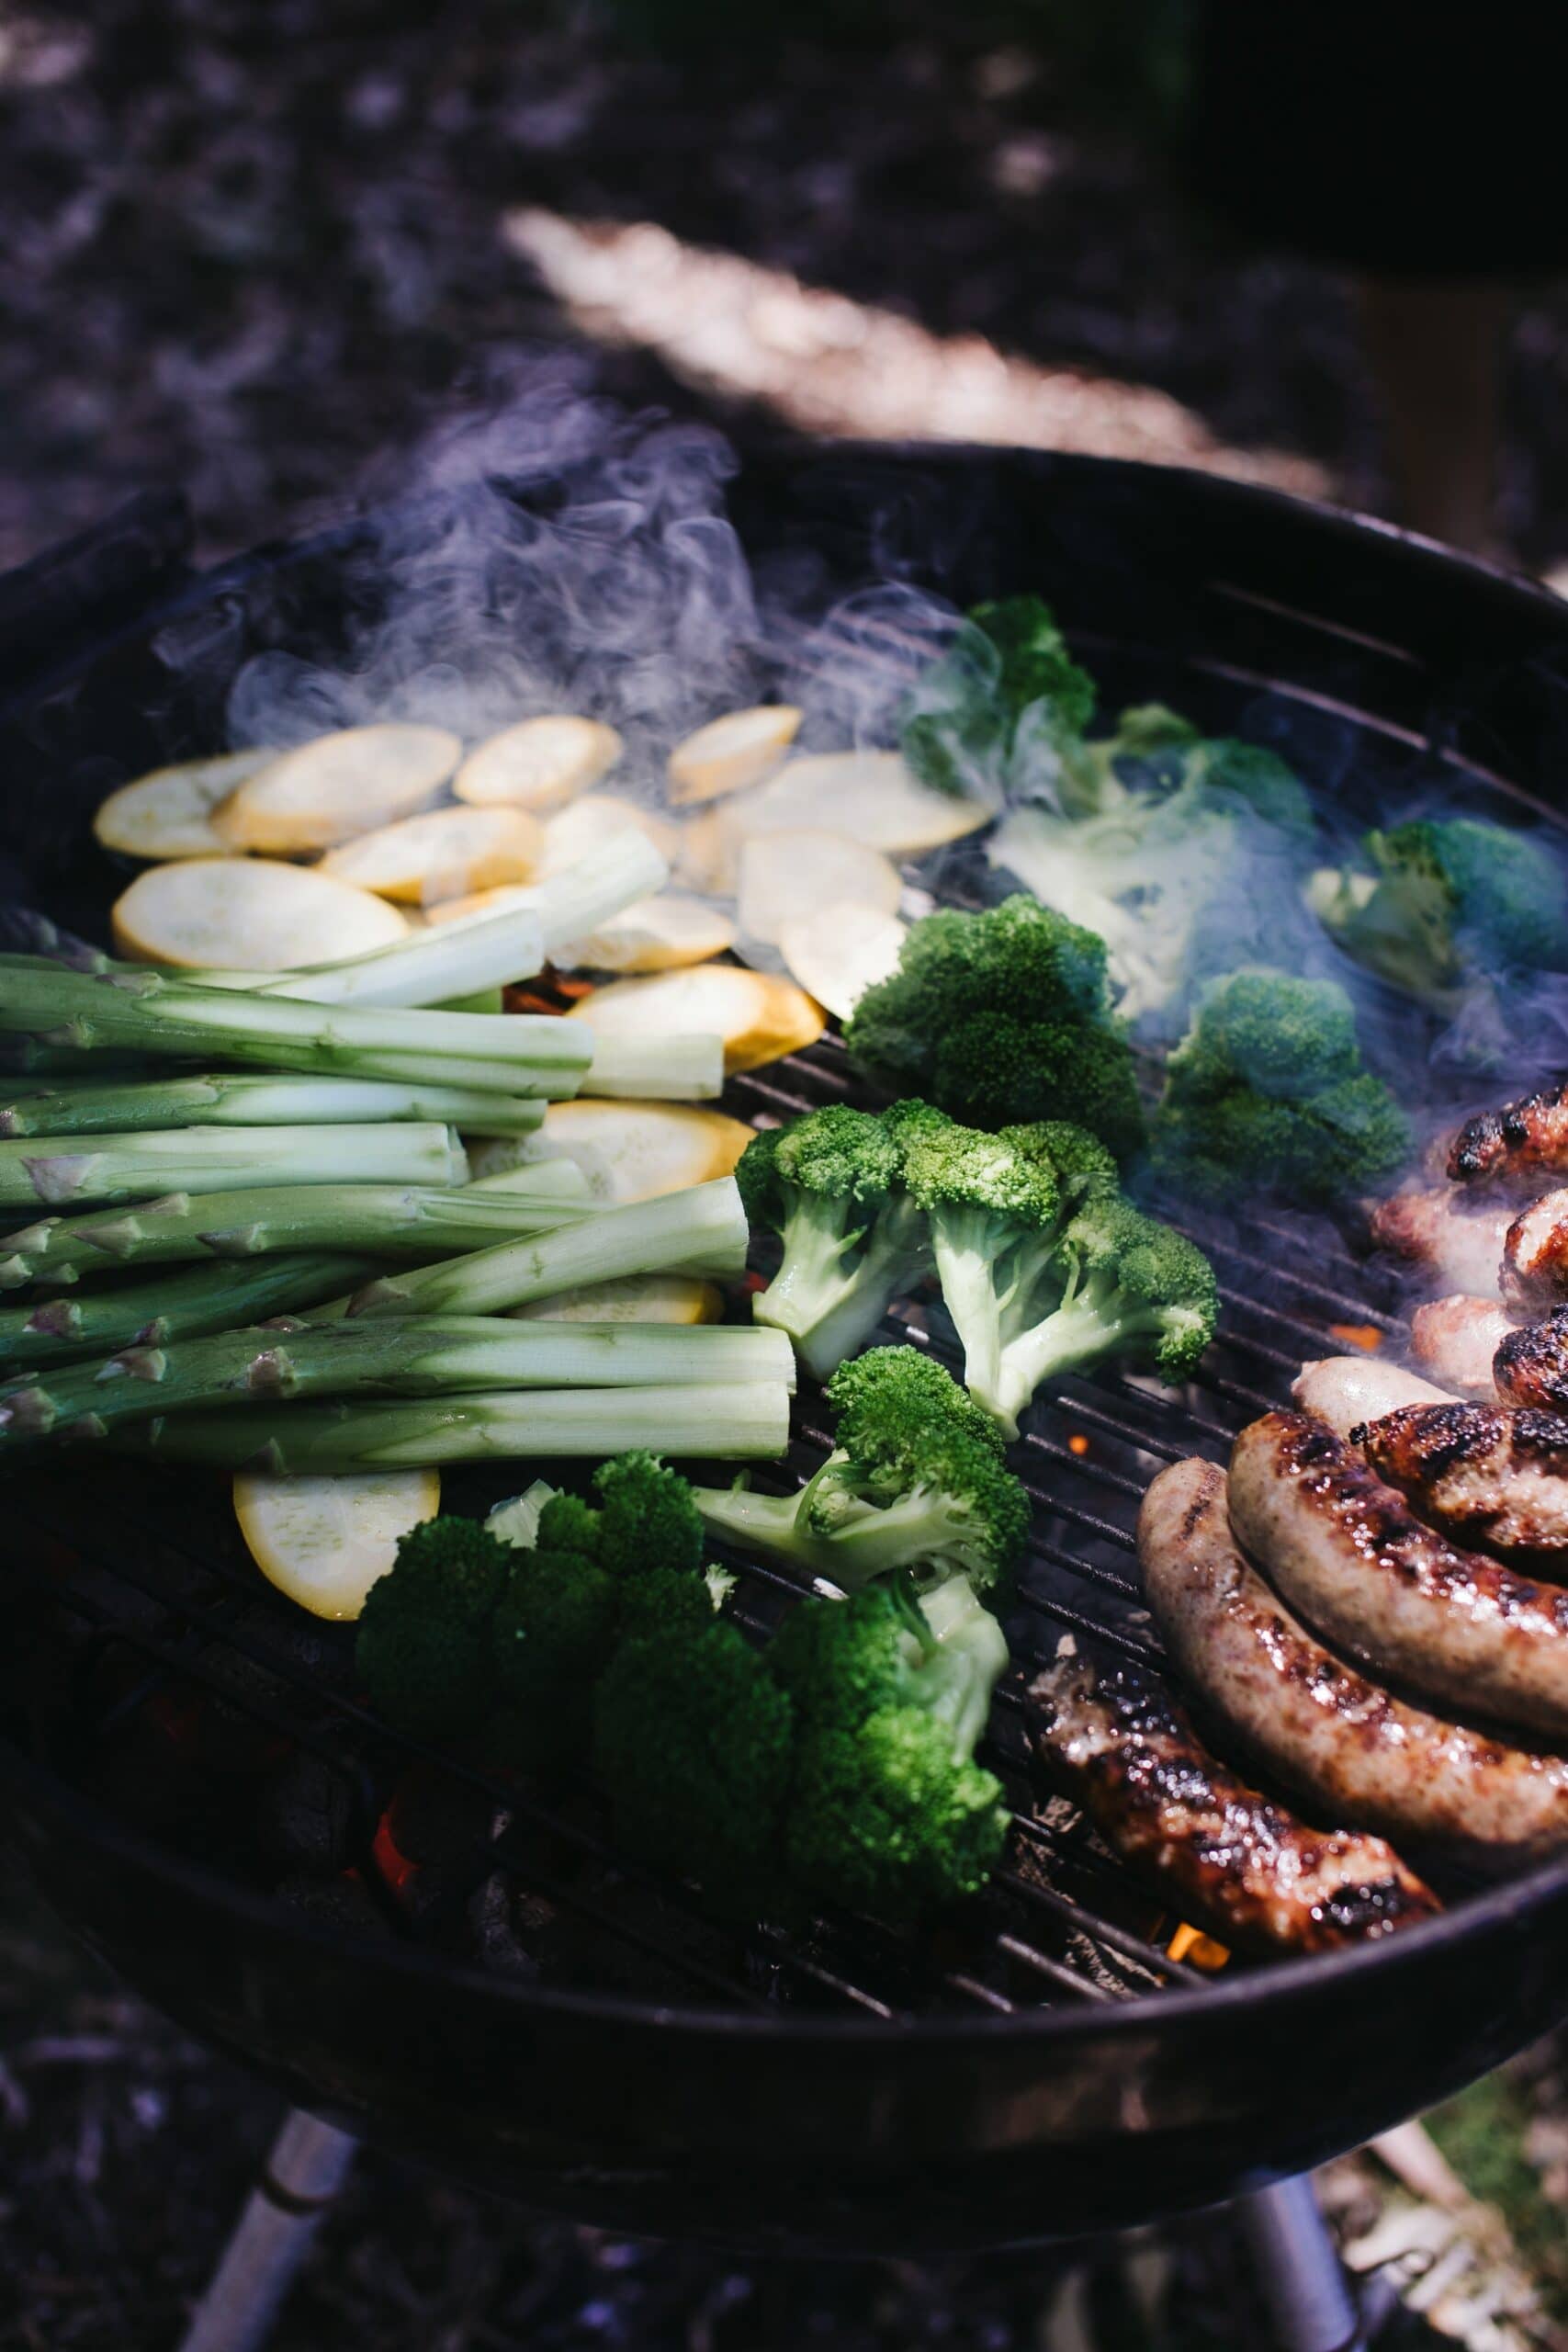 Vegetables and meat on a charcoal grill